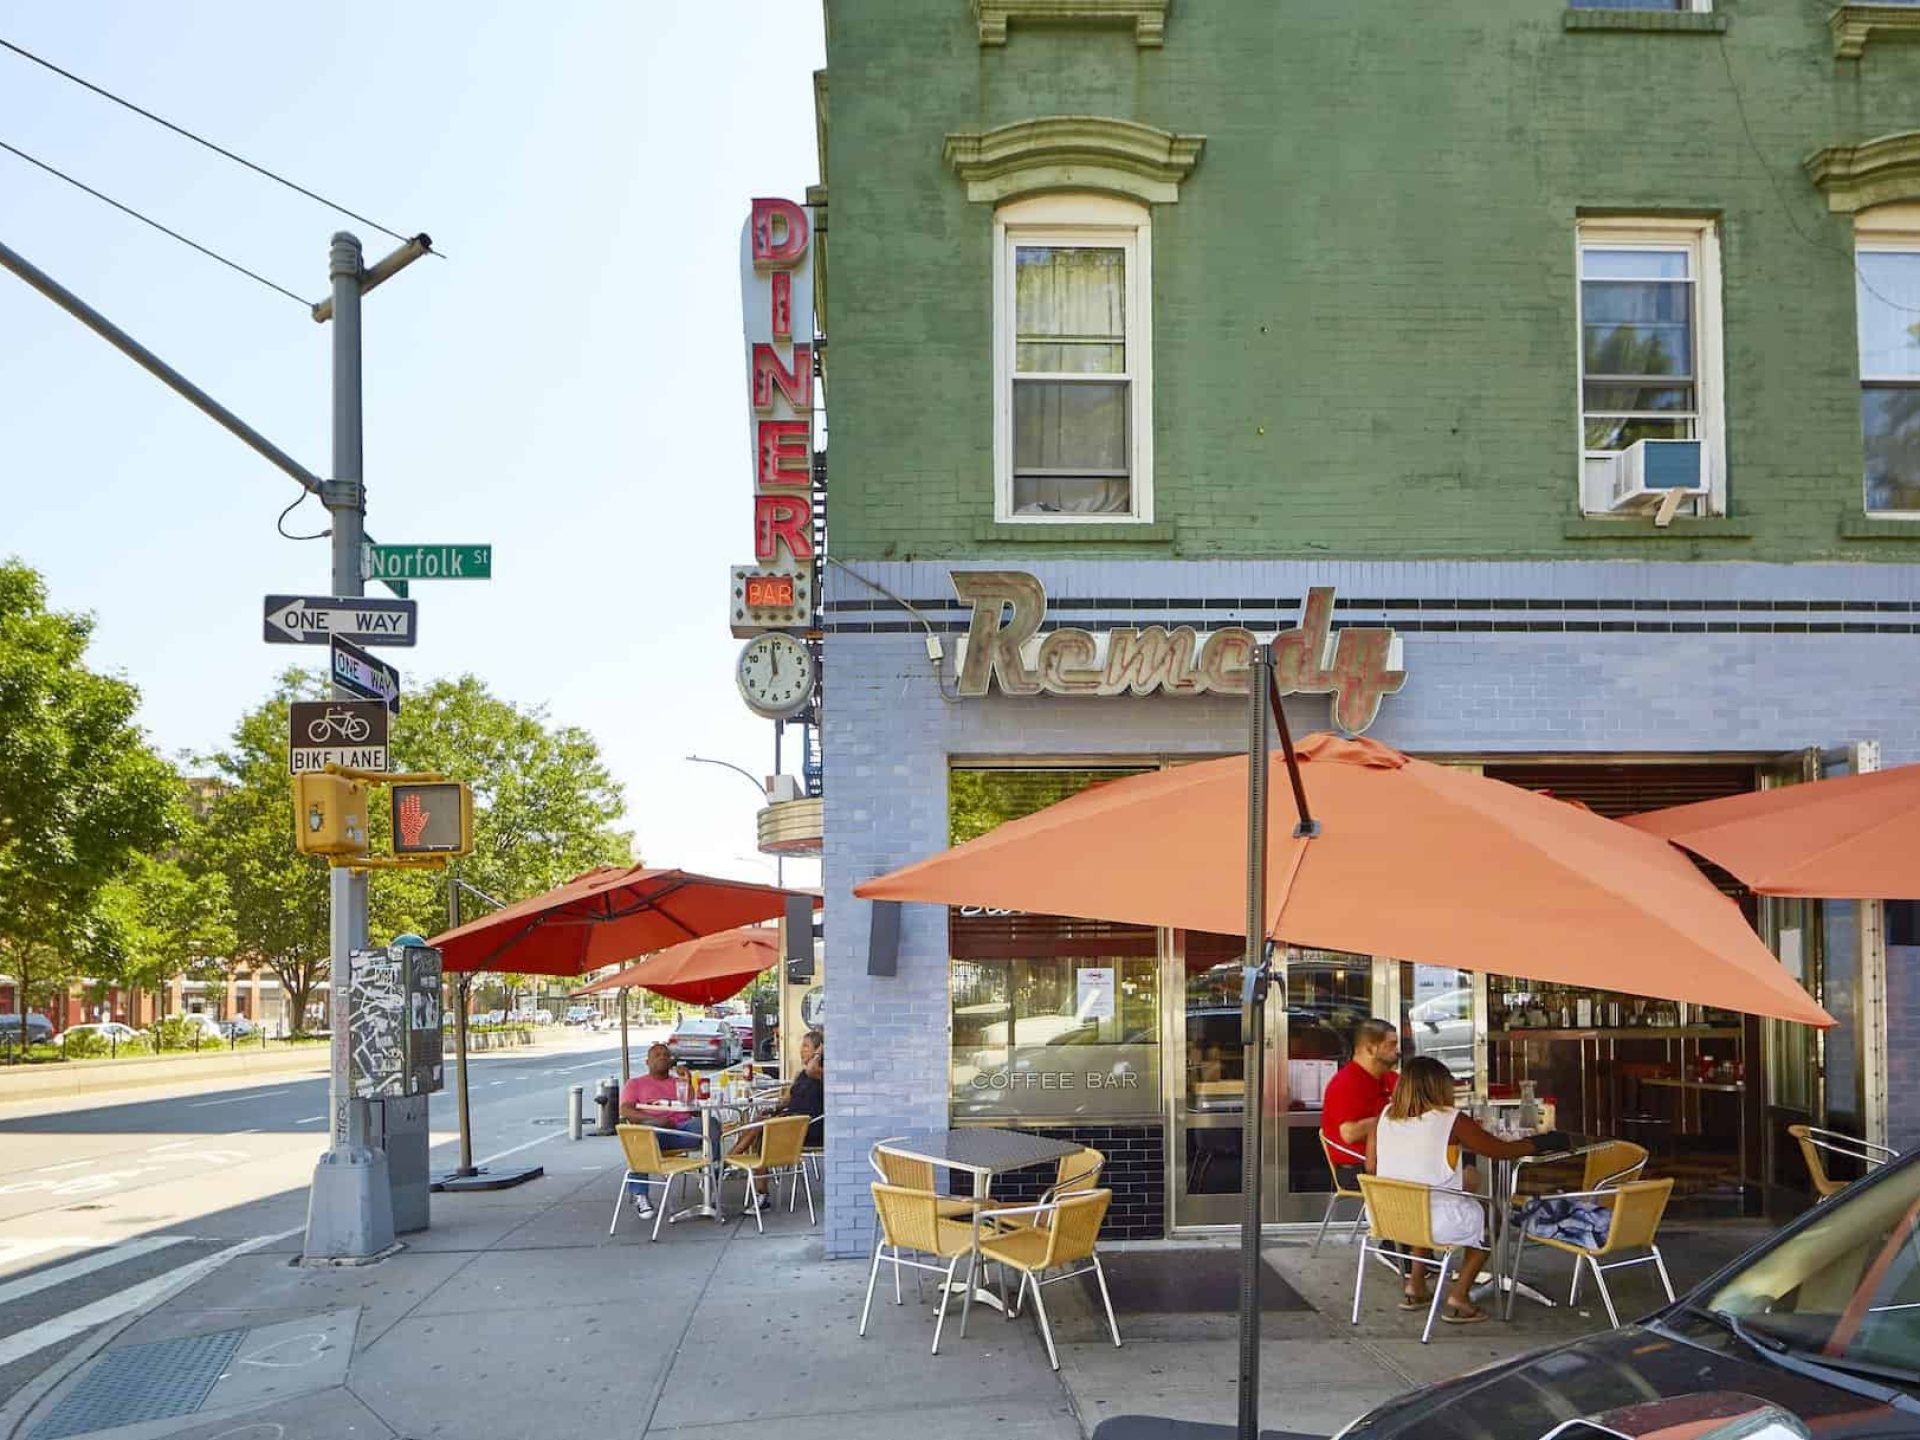 Exterior of Remedy Diner on Norfolk St in New York with lit "Diner" sign and outdoor seating and large red umbrellas.